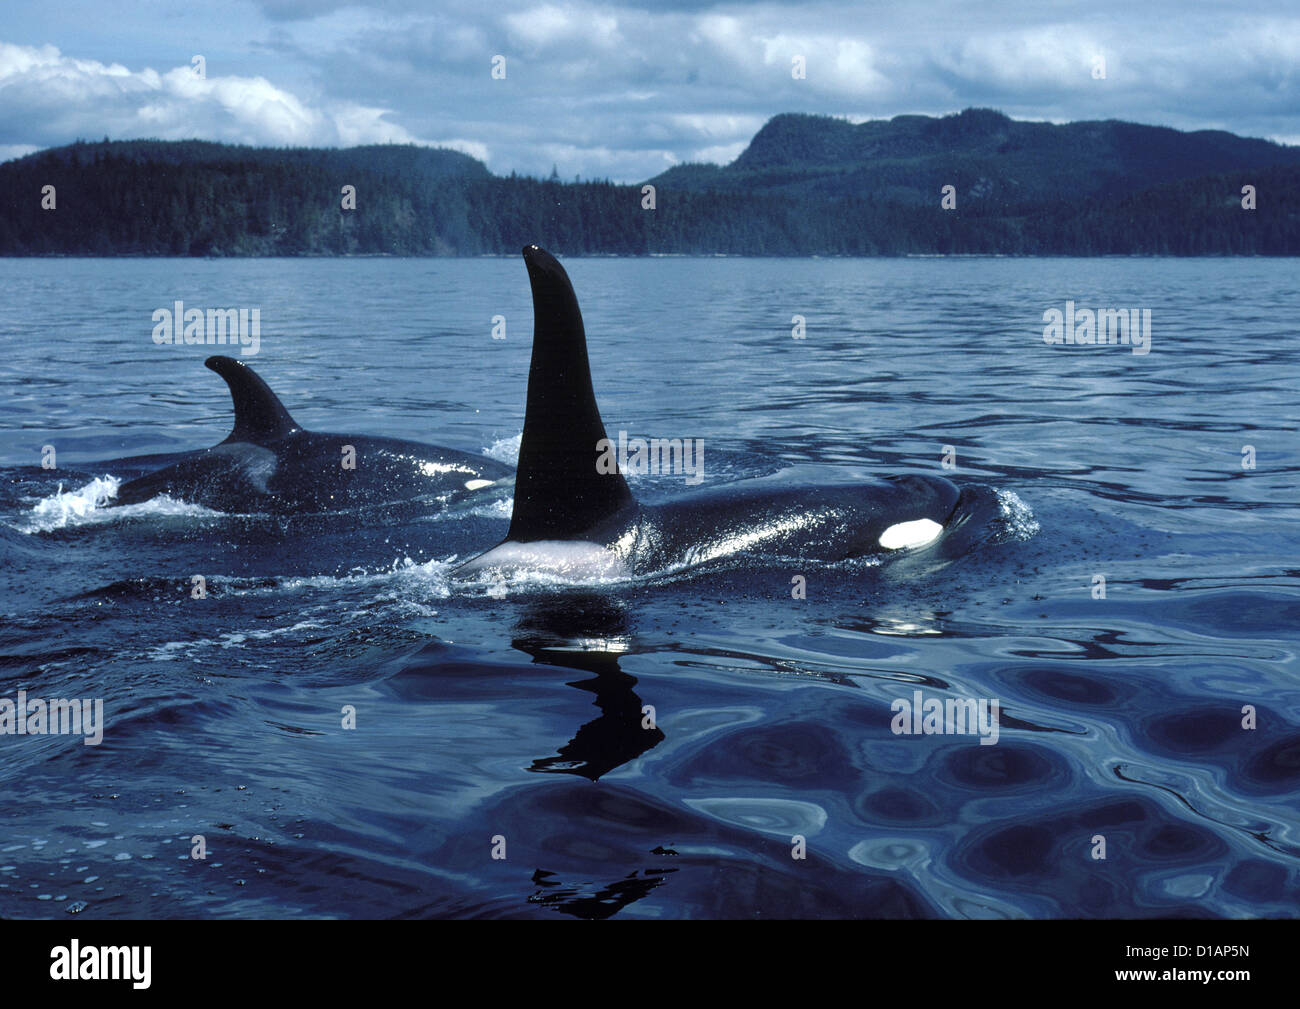 Killer whale; Orca.Orcinus orca.Male (tall dorsal fin), and female.Photographed in Johnstone Strait, British Columbia, Canada Stock Photo